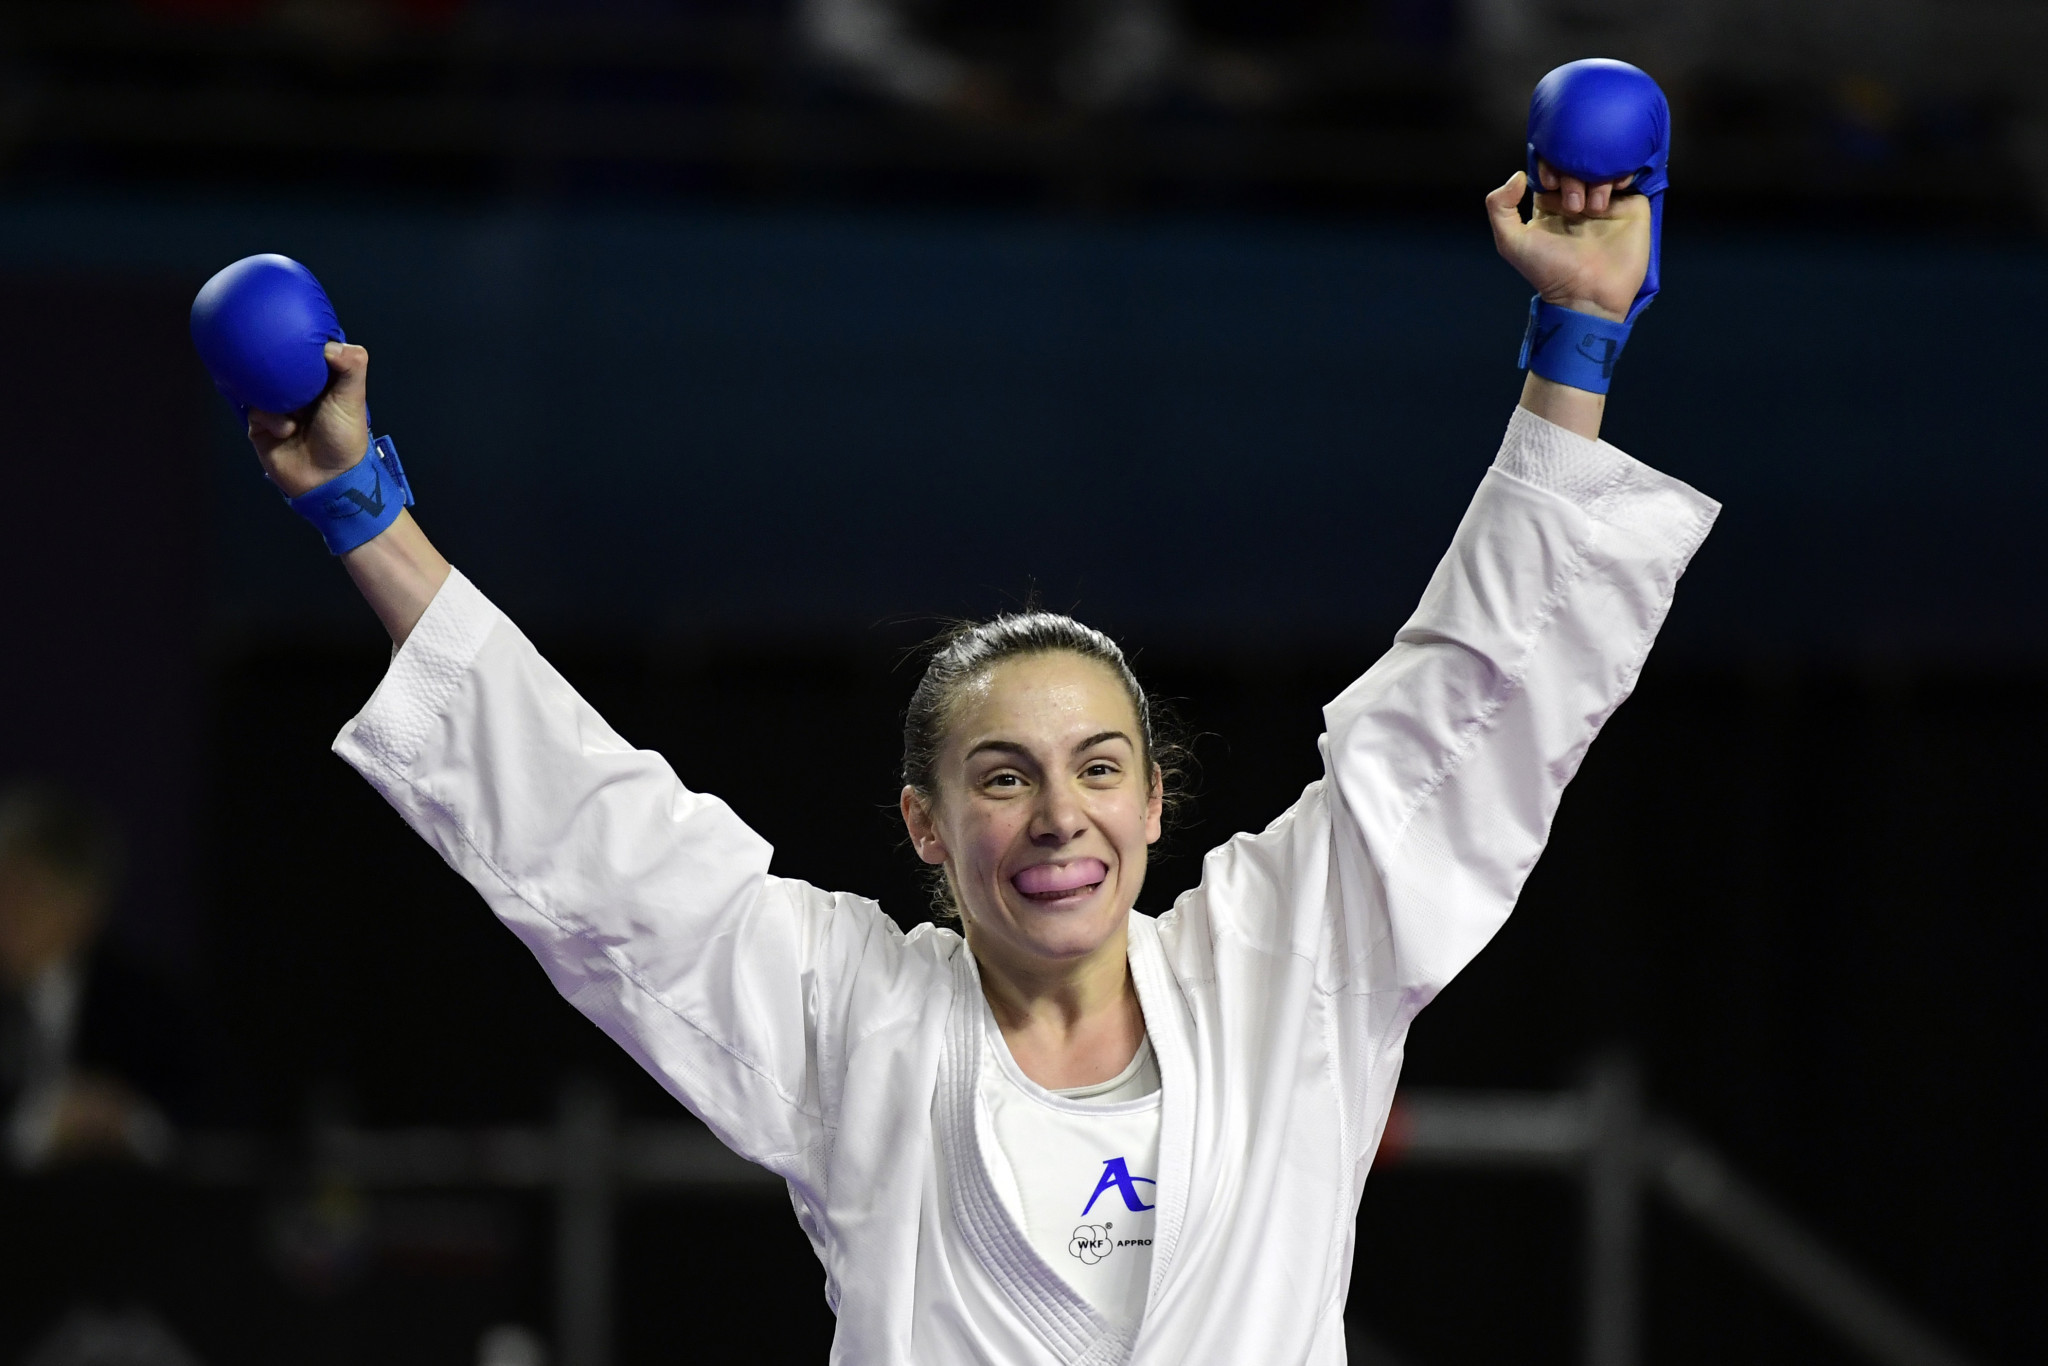 More final line-ups confirmed on day two of the Karate 1-Premier League in Lisbon